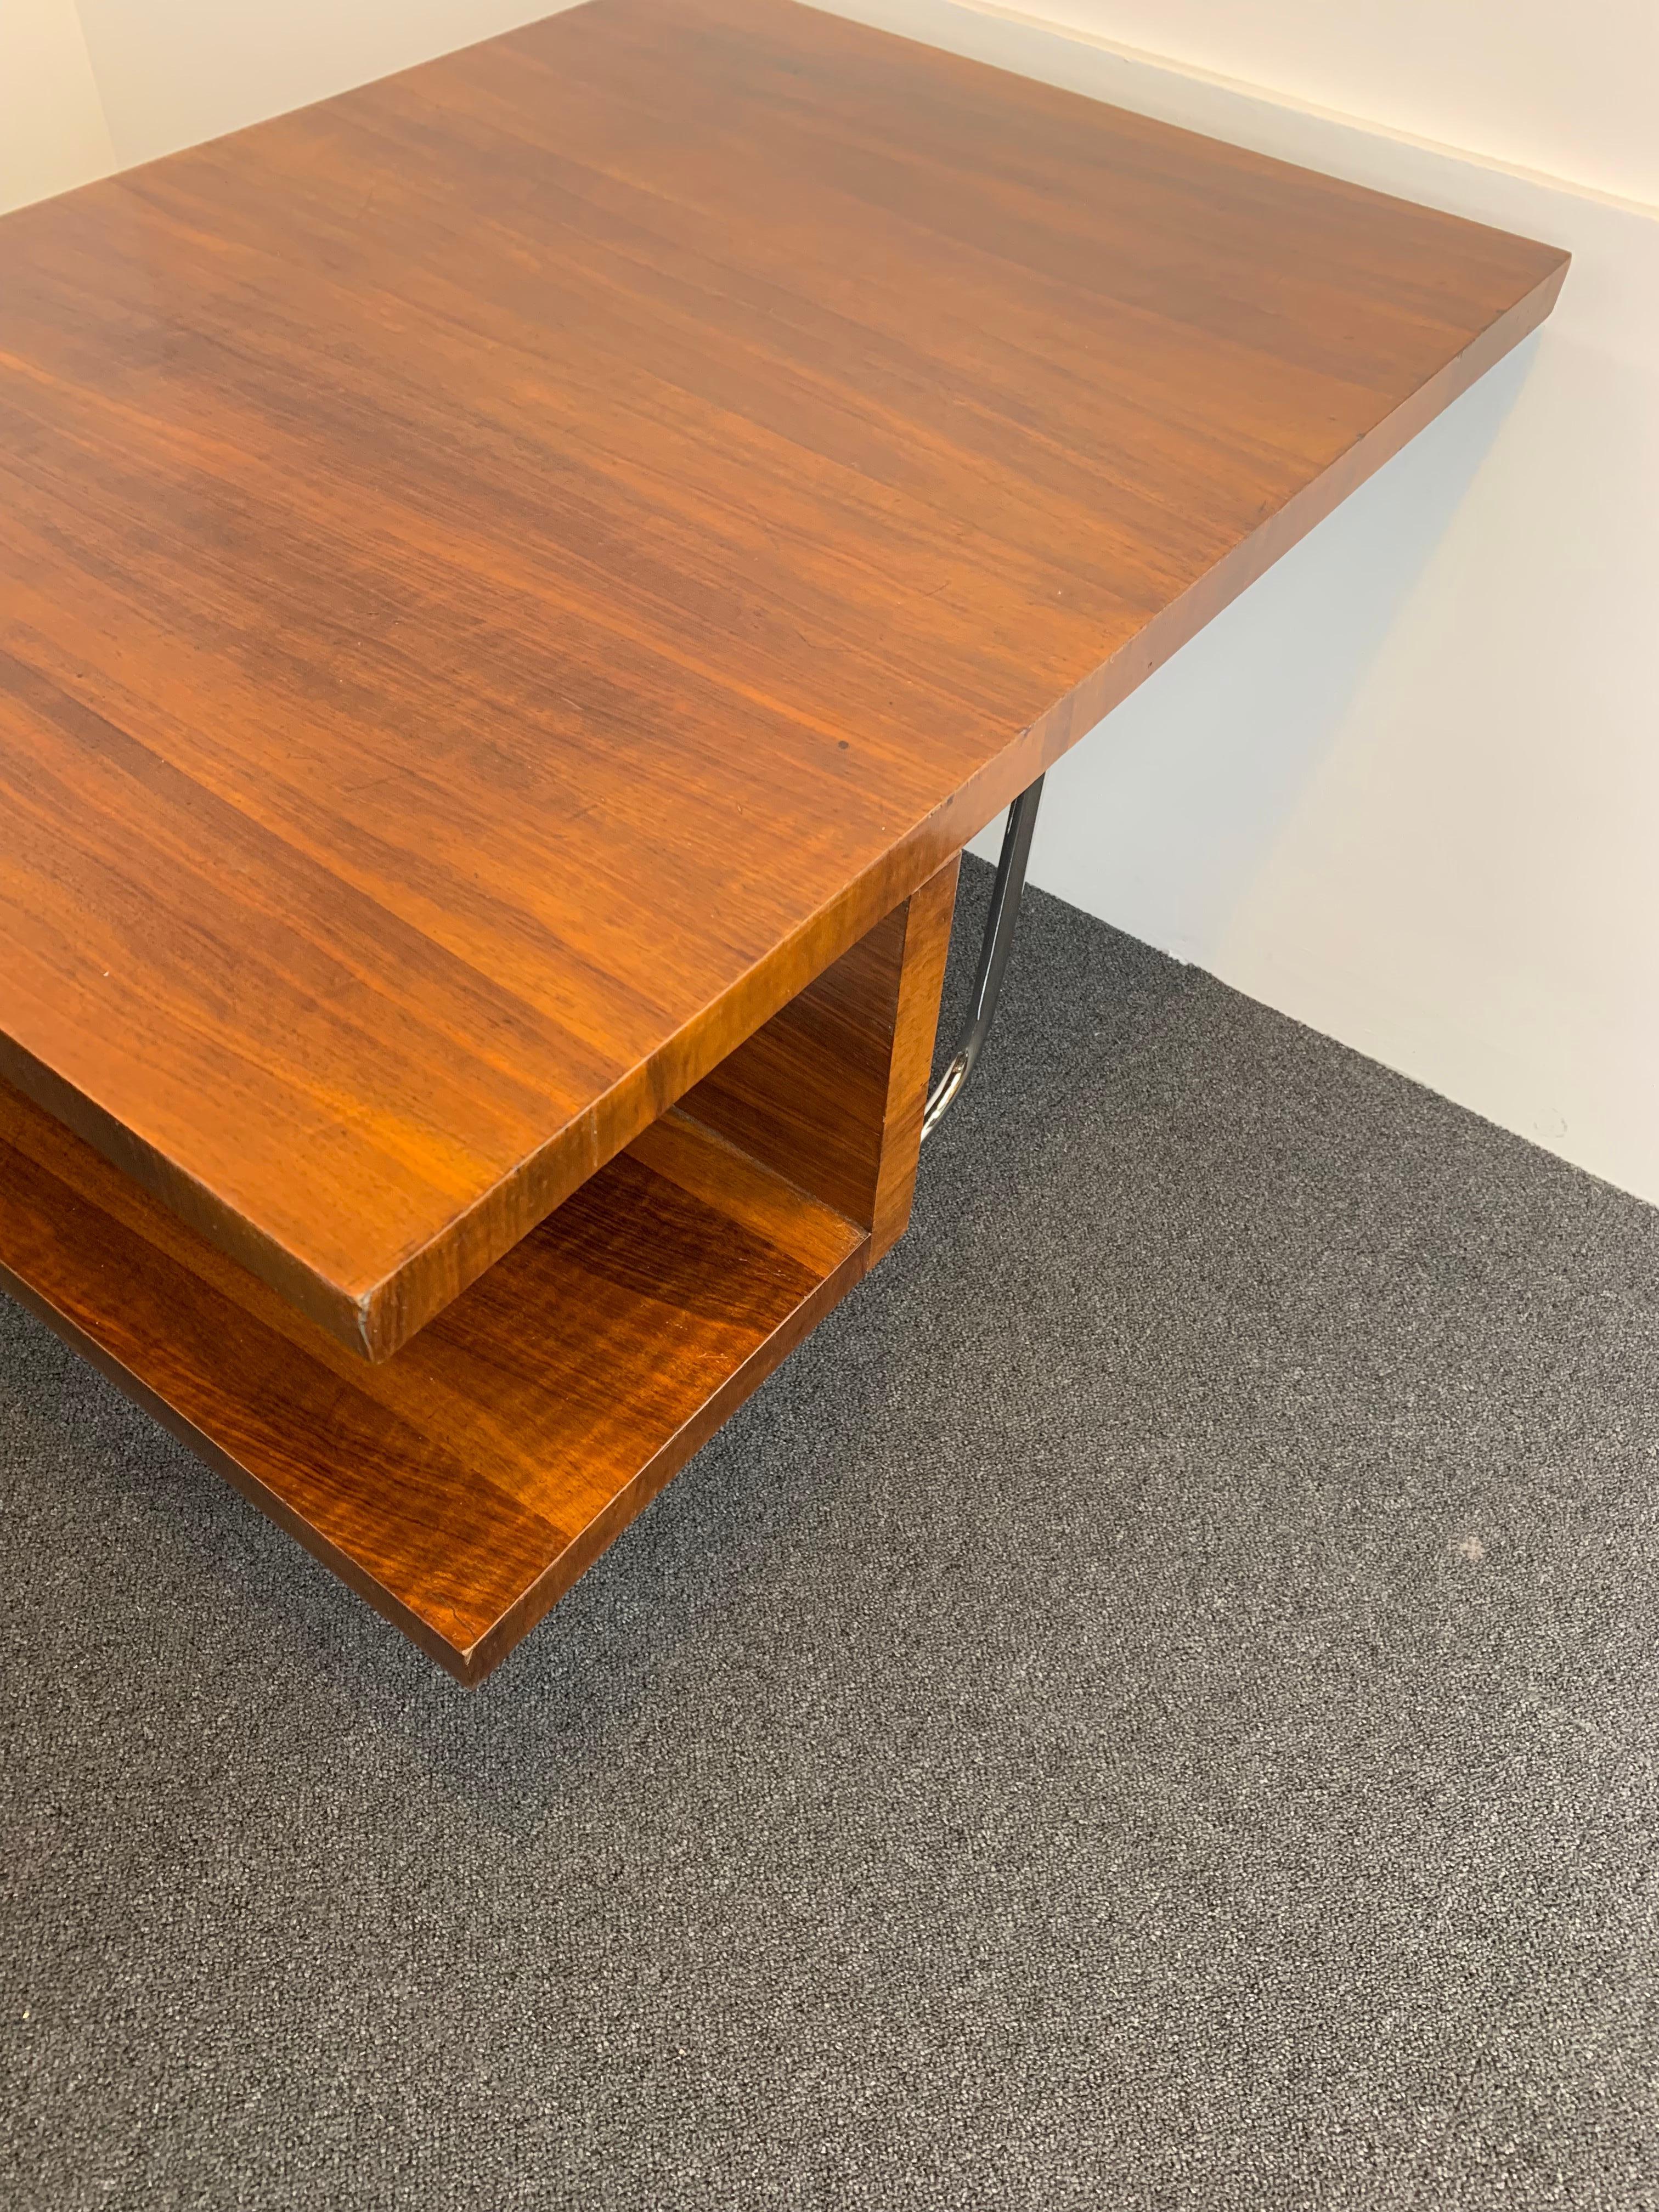 Mid-20th Century Art Deco Walnut Coffee Table Bespoke Piece Designed by Architect H de Witte For Sale